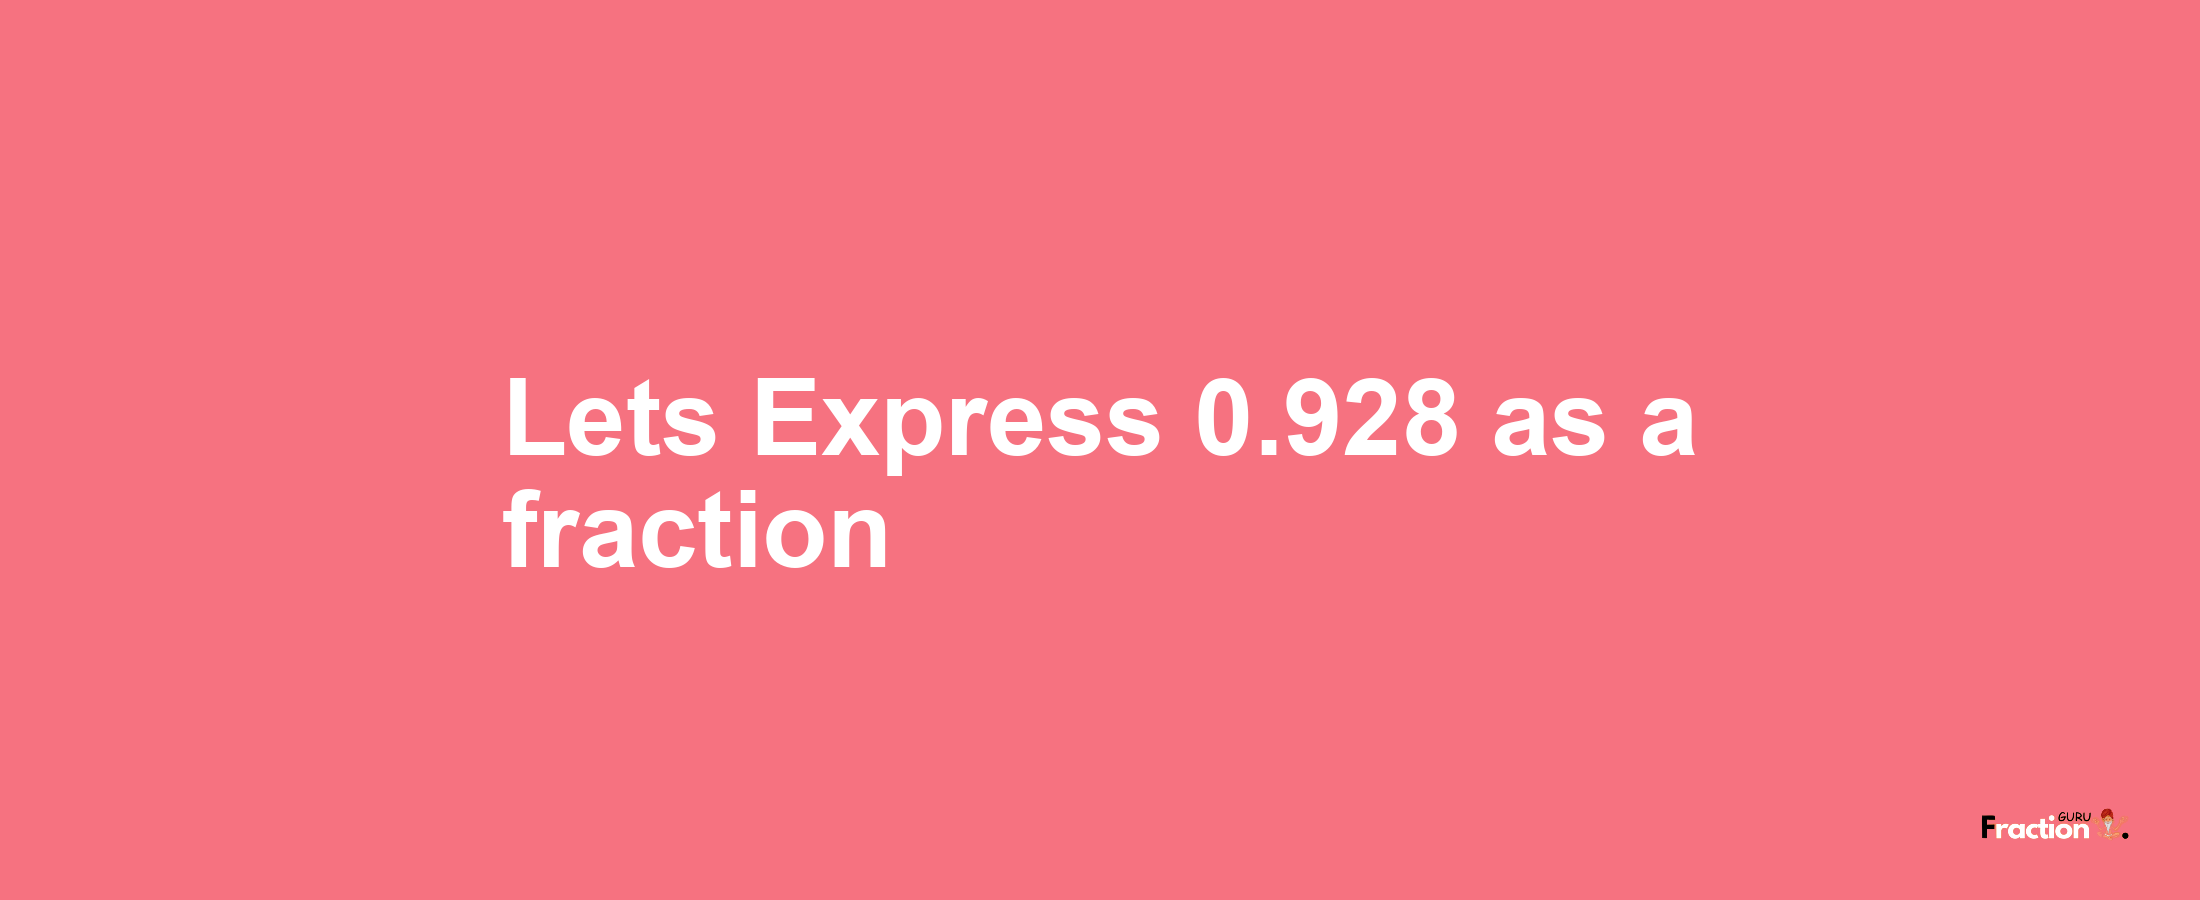 Lets Express 0.928 as afraction